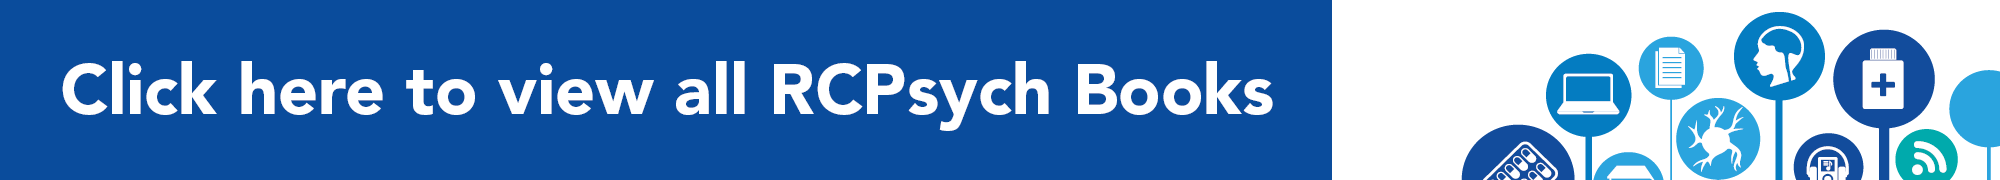 Click here to view all our RCPsych books